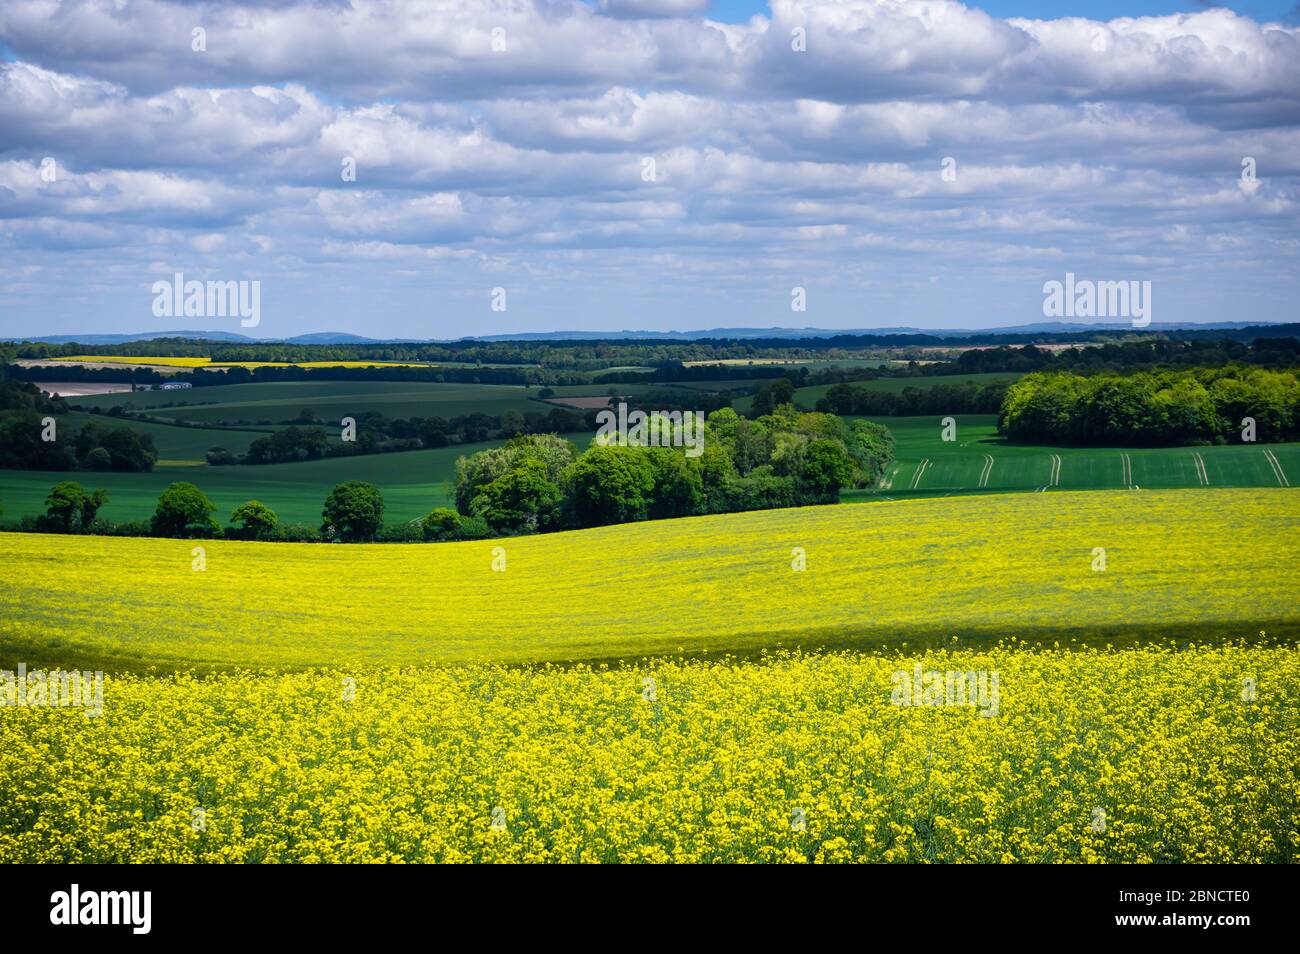 A sunny spring day looking over the yellow fields of rapeseed/canola in the rural countryside of Hampshire, England. Stock Photo